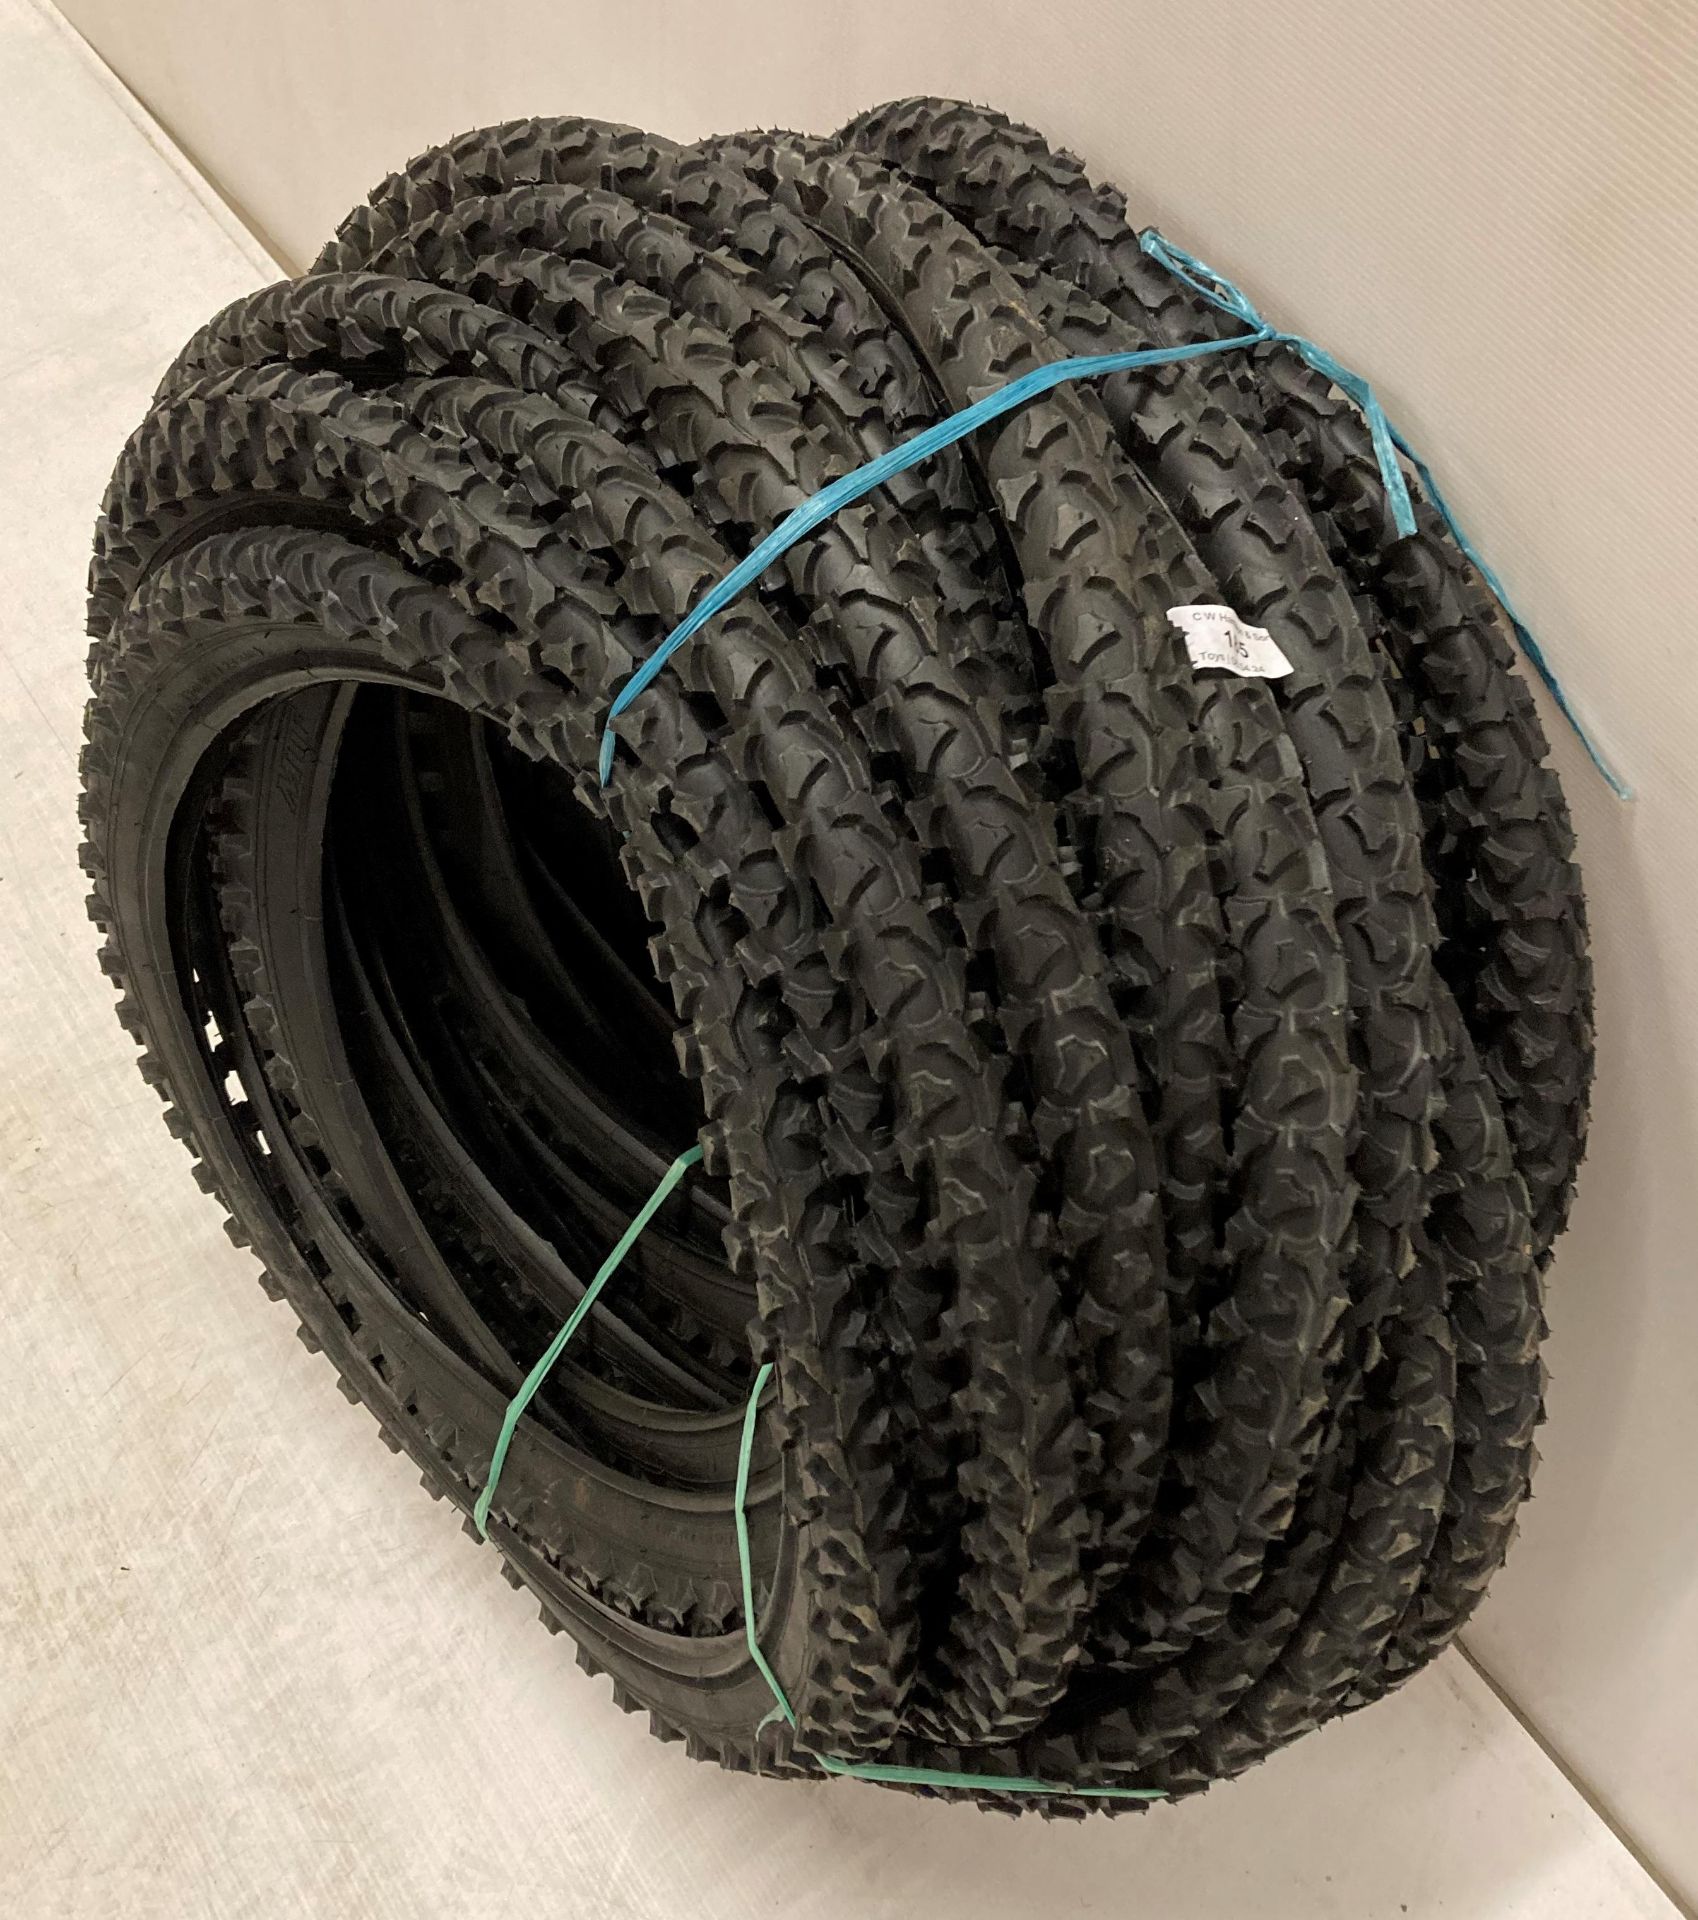 26 x Mitf cycle tyres 50/406 (20 x 1. - Image 2 of 2